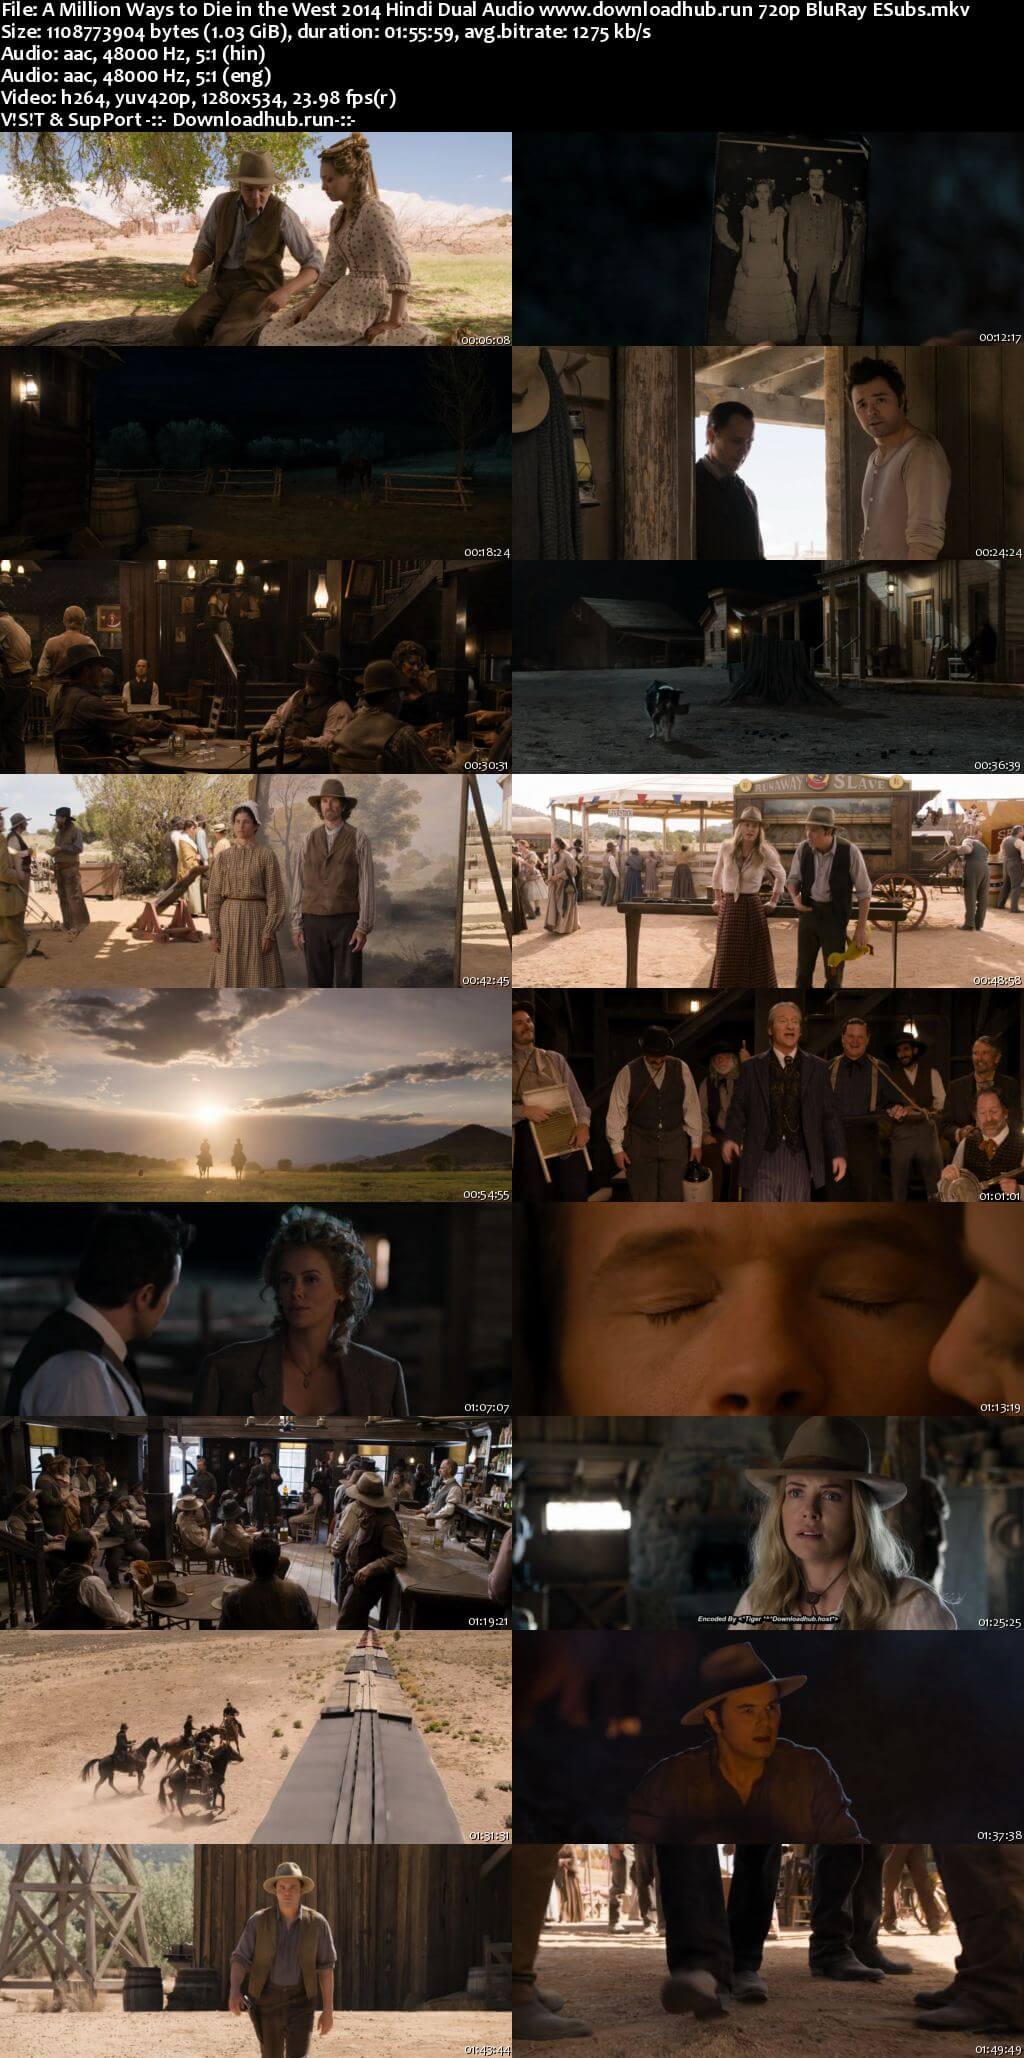 A Million Ways to Die in the West 2014 Hindi Dual Audio 720p BluRay ESubs